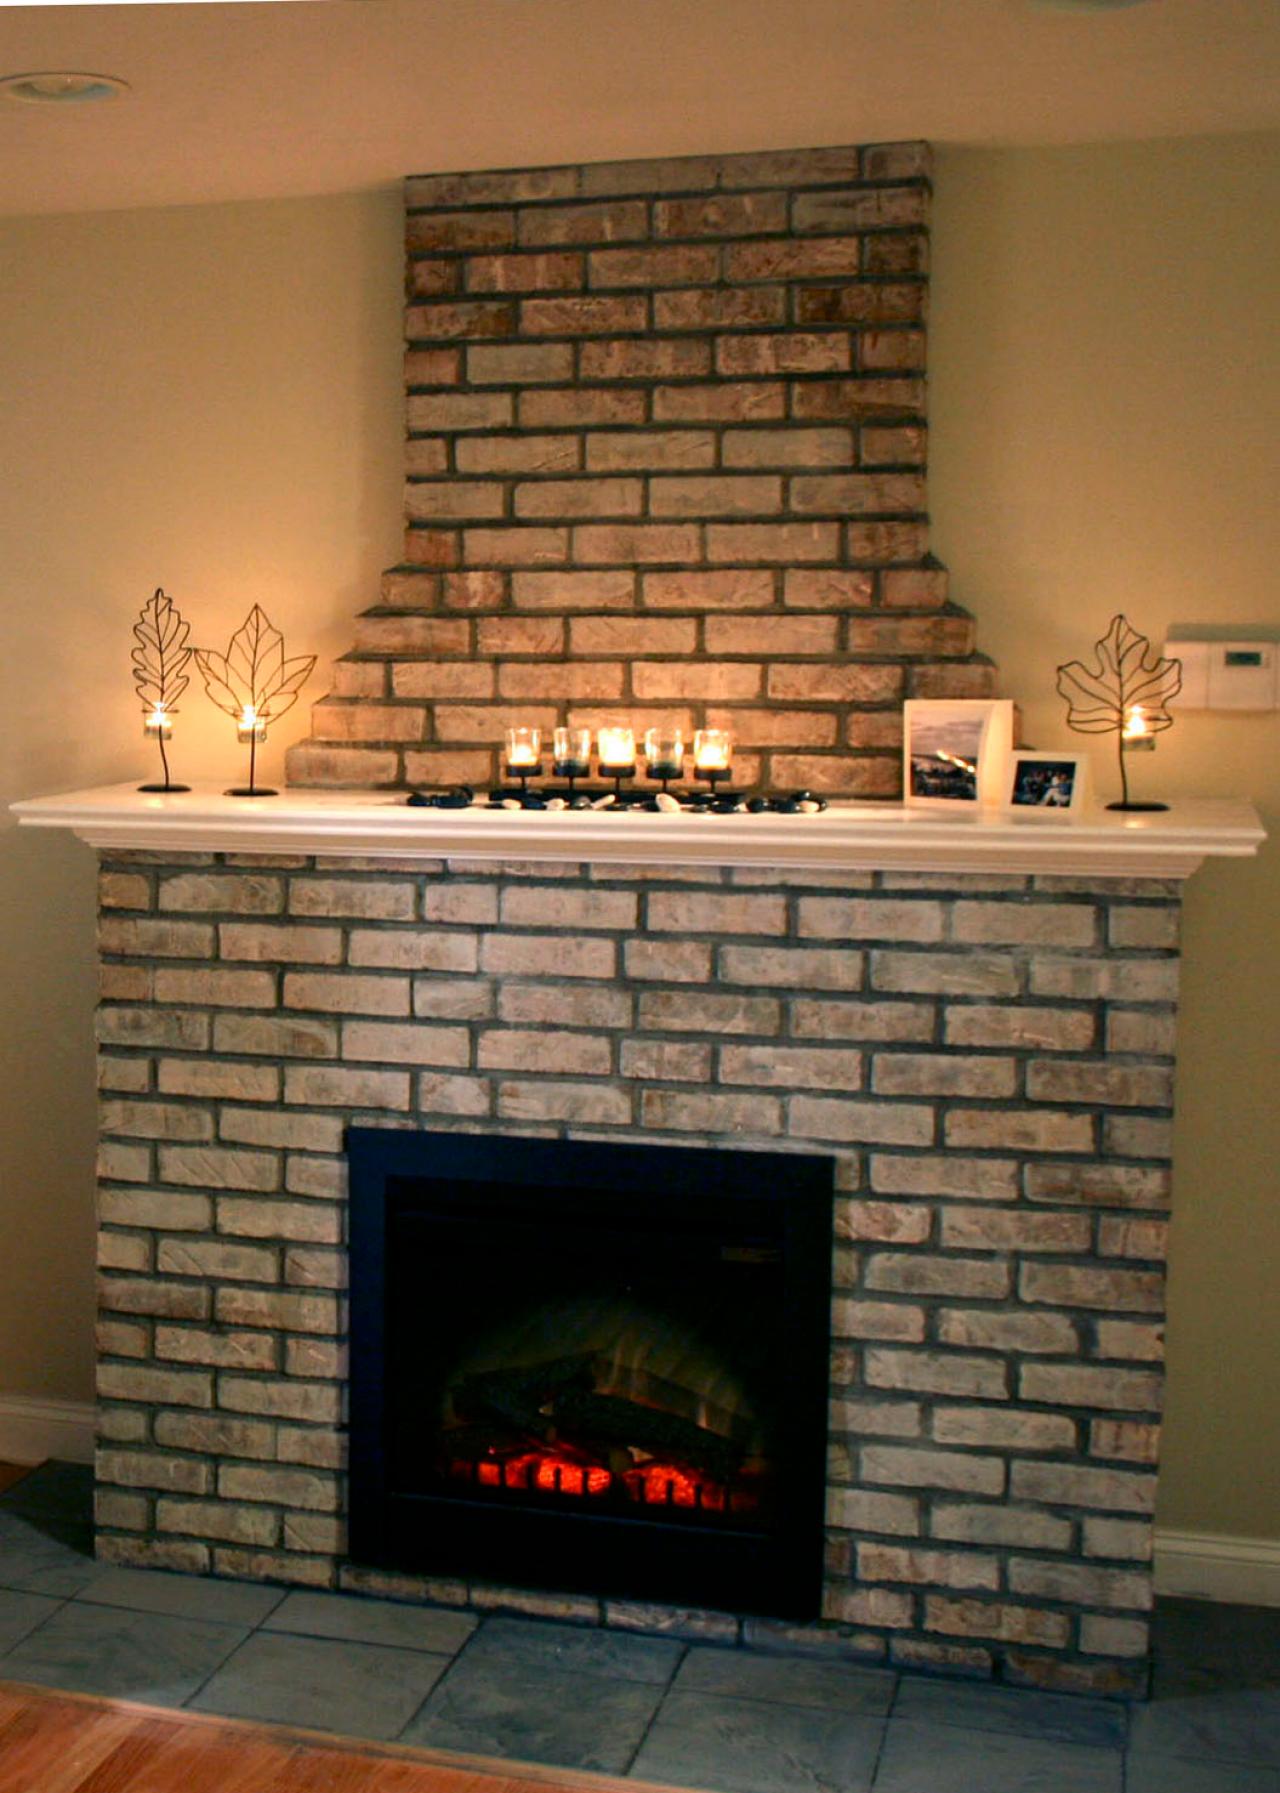 Electric Fireplace With Brick Facade, How To Put Tile On A Brick Fireplace